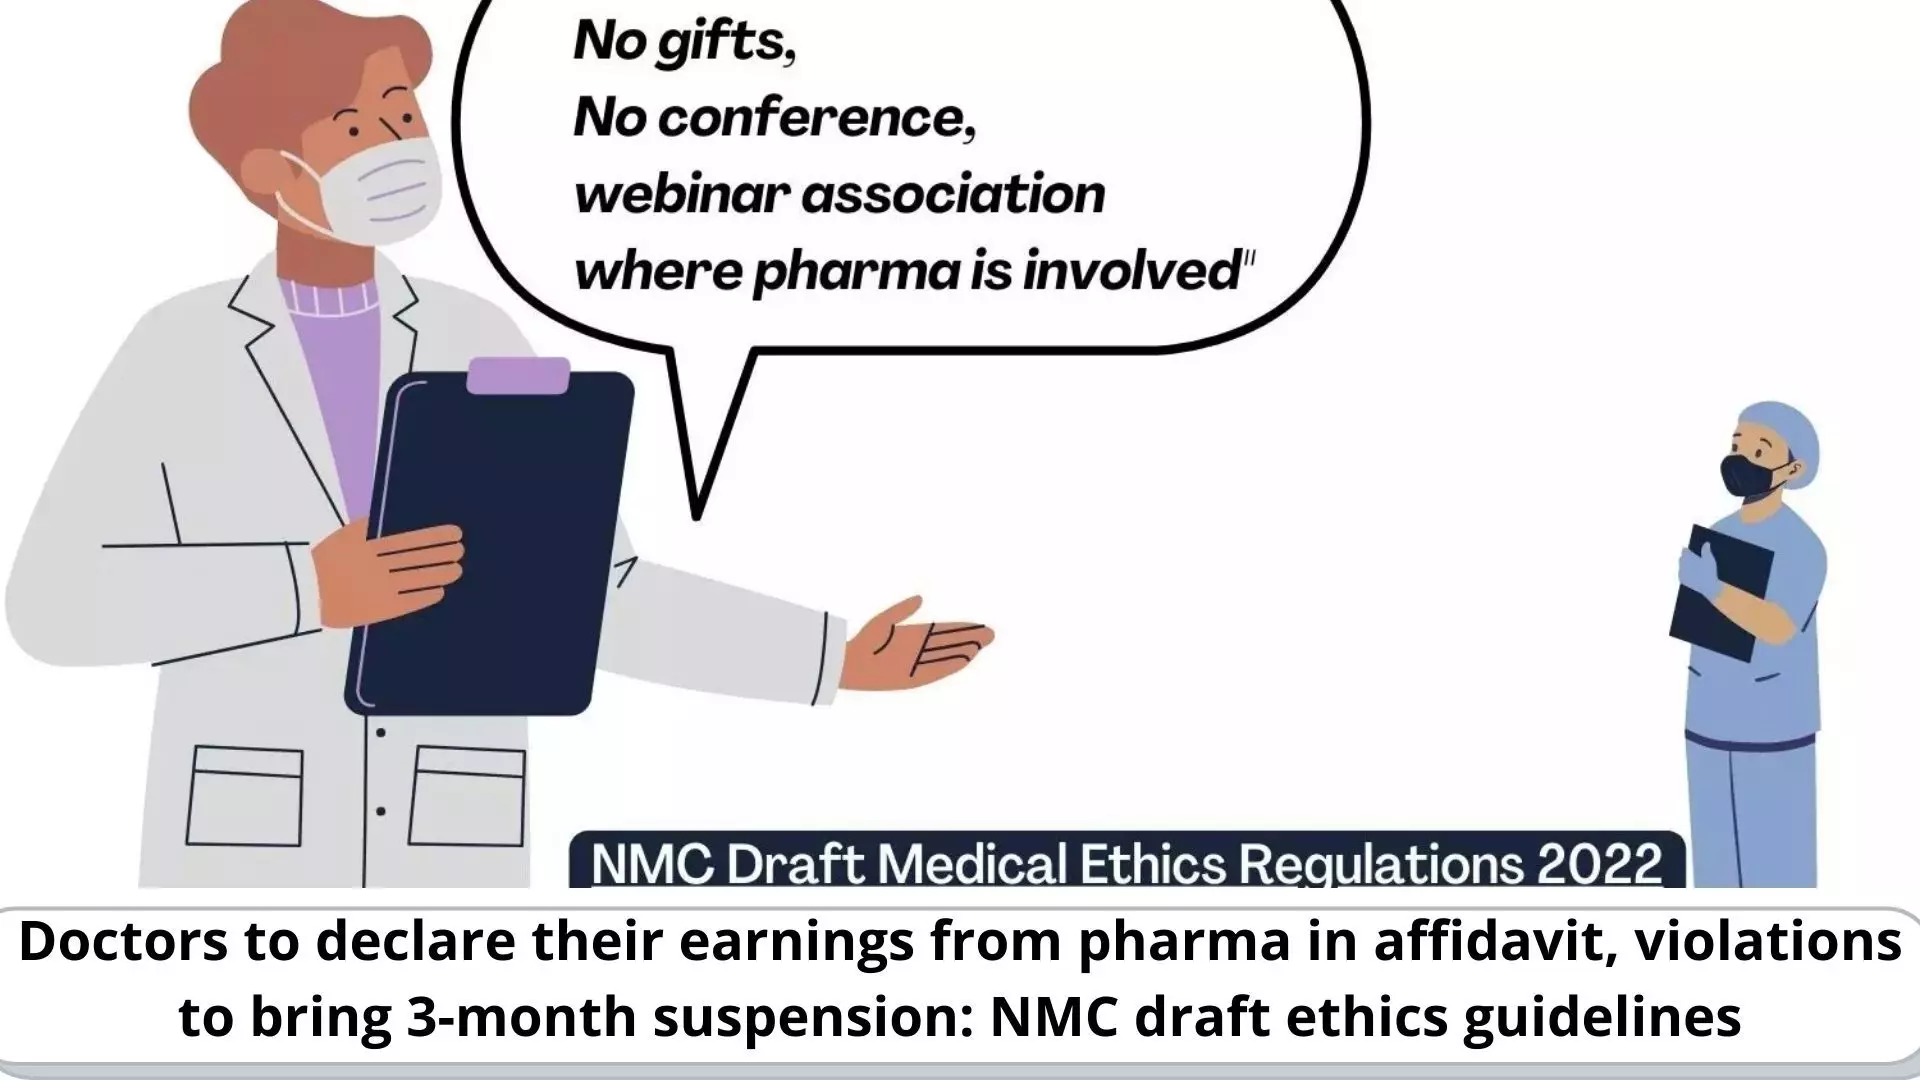 Doctors to declare their earnings from pharma in affidavit, violations to bring 3-month suspension: NMC draft ethics guidelines